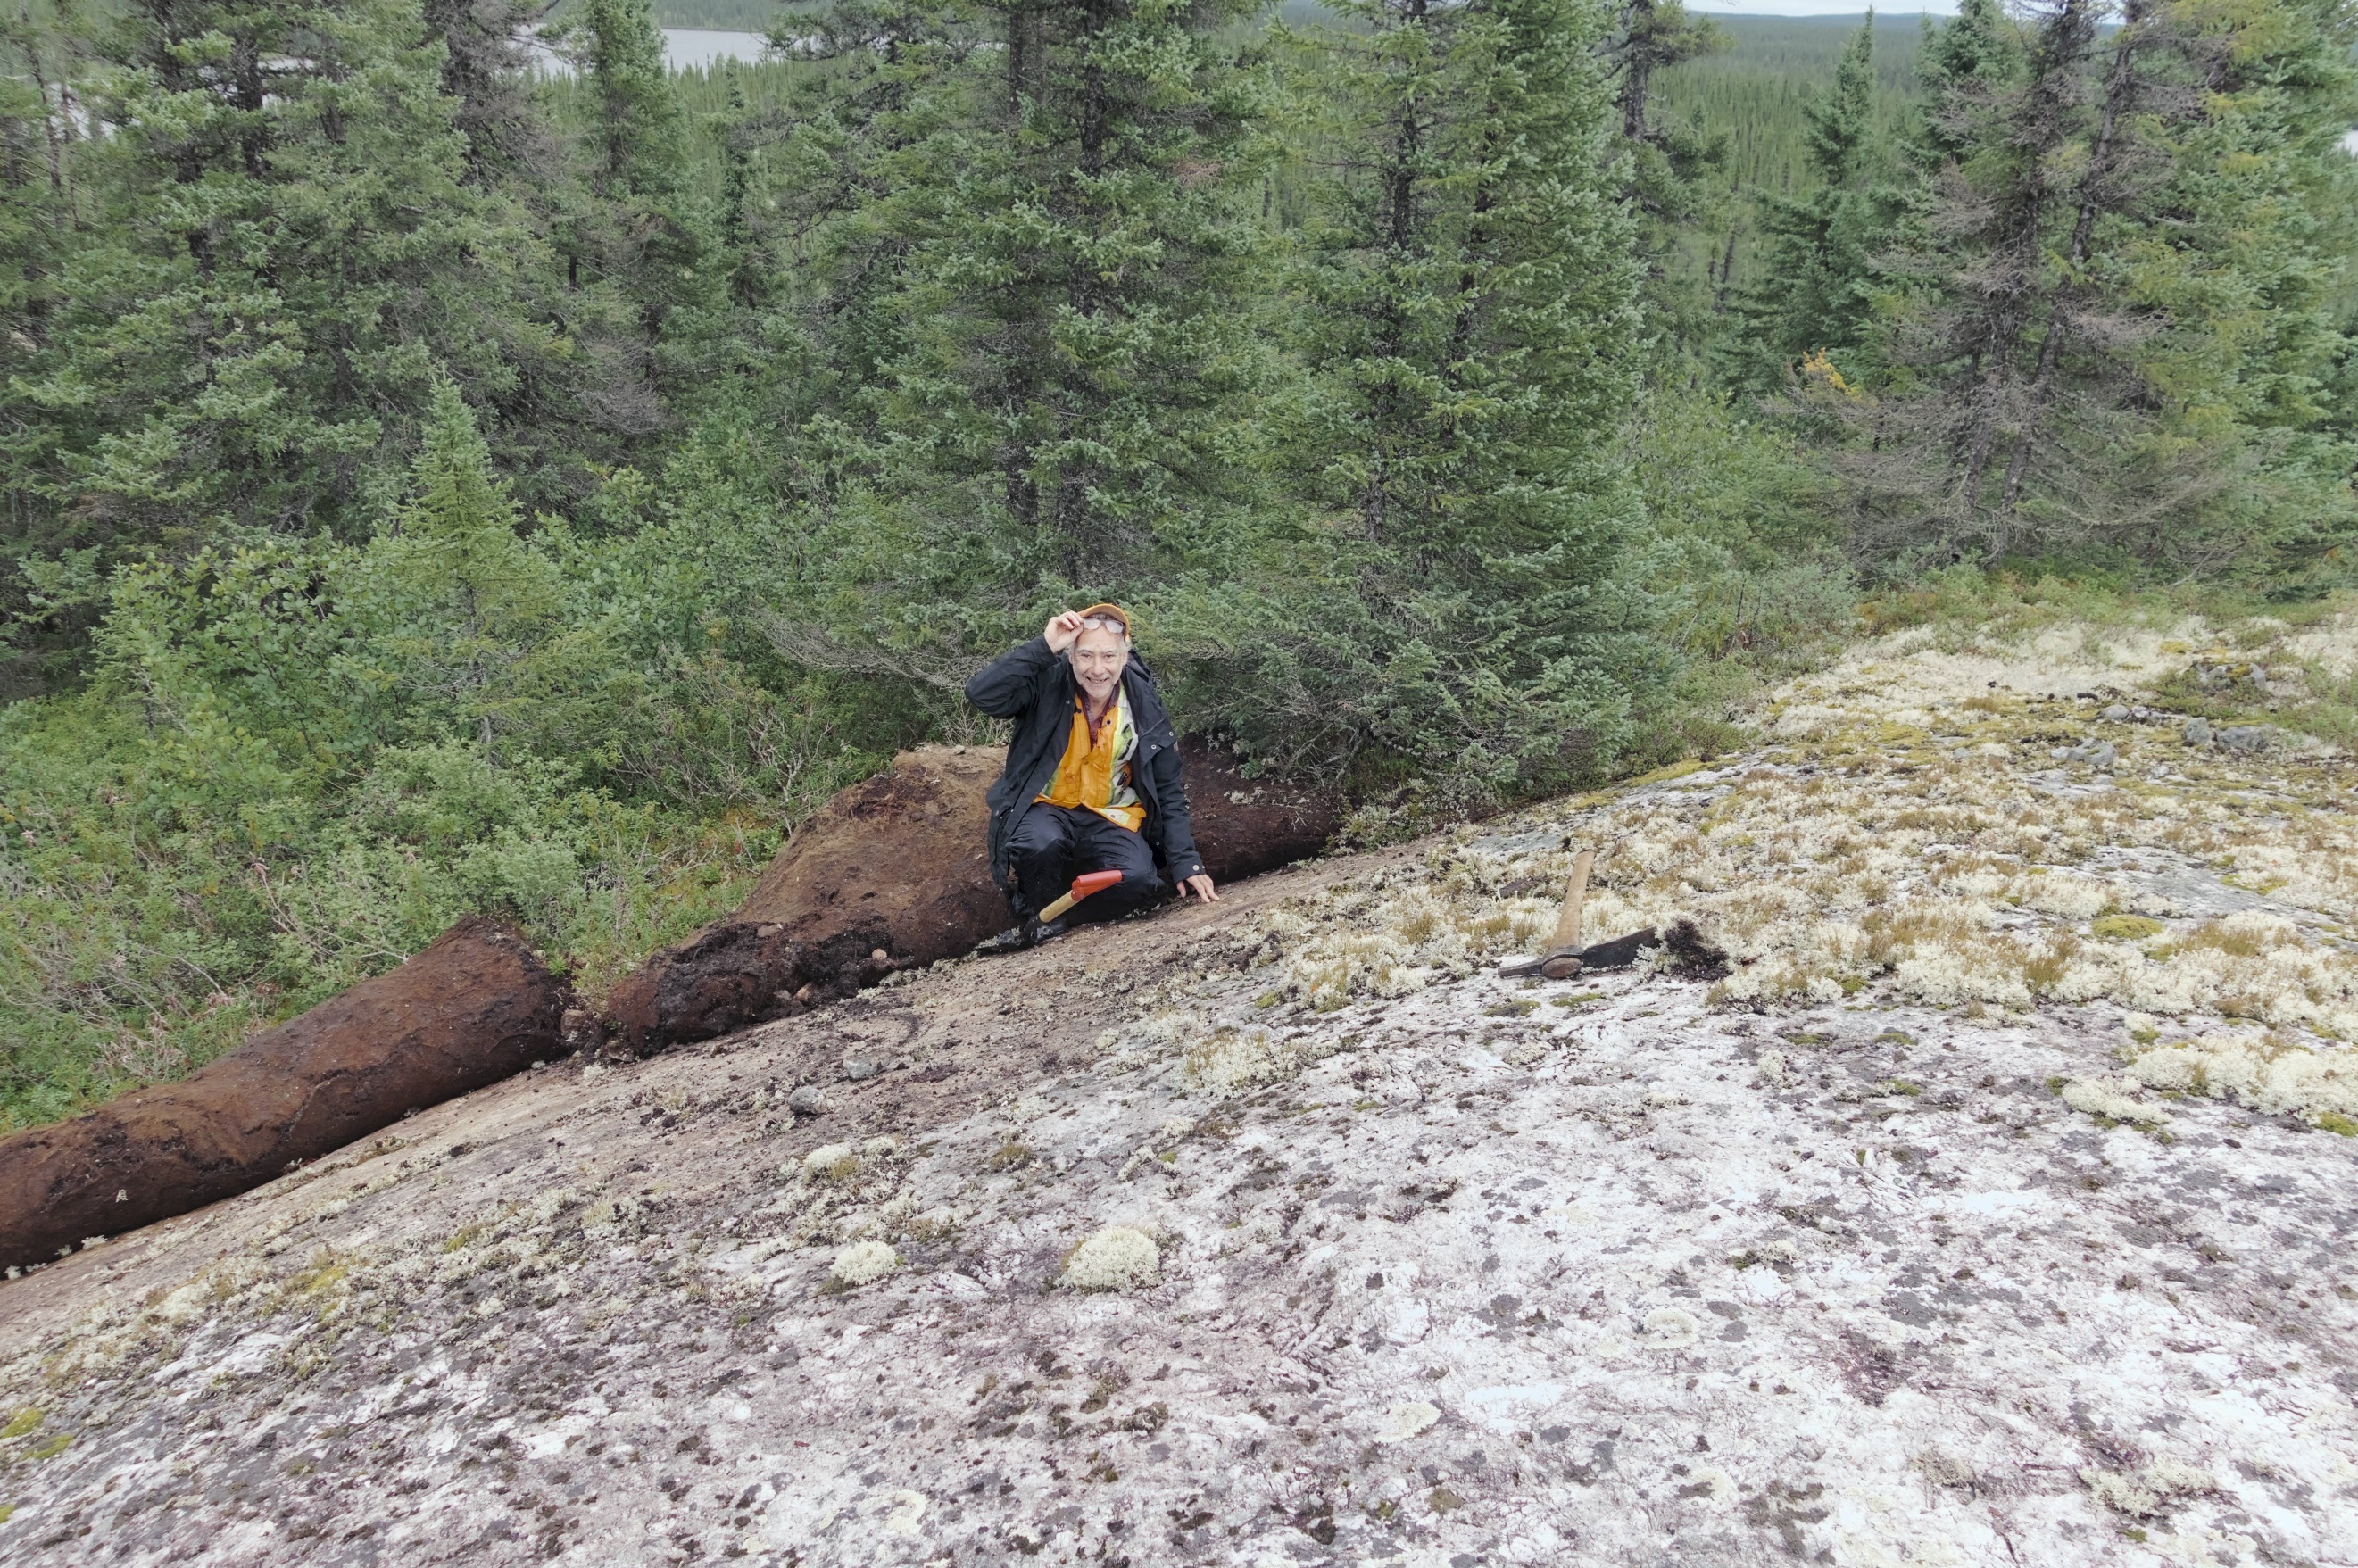 Mr. Rémi Charbonneau, Ph.D., P. Geo., of Inlandsis Consultants, discoverer of the Mirage lithium pegmatite field, examining a spodumene-rich outcrop